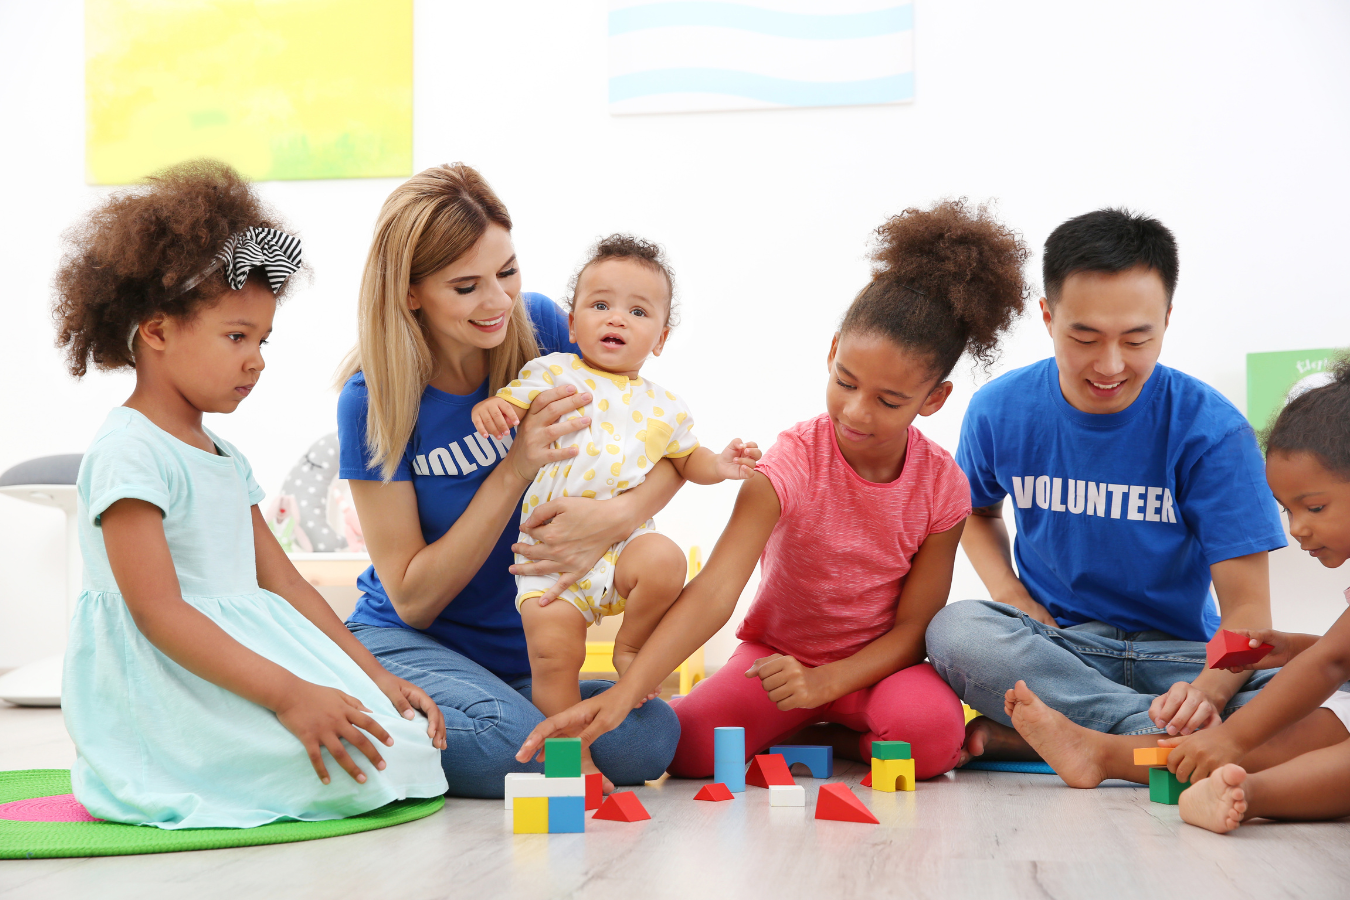 Two adult volunteers take care of three children while they are playing. Utilizing Sparkrock 365 ERP, the nonprofit efficiently manages child care duties with volunteers. This empowers them to spend more time directly assisting and working with the kids, fulfilling their mission effectively.